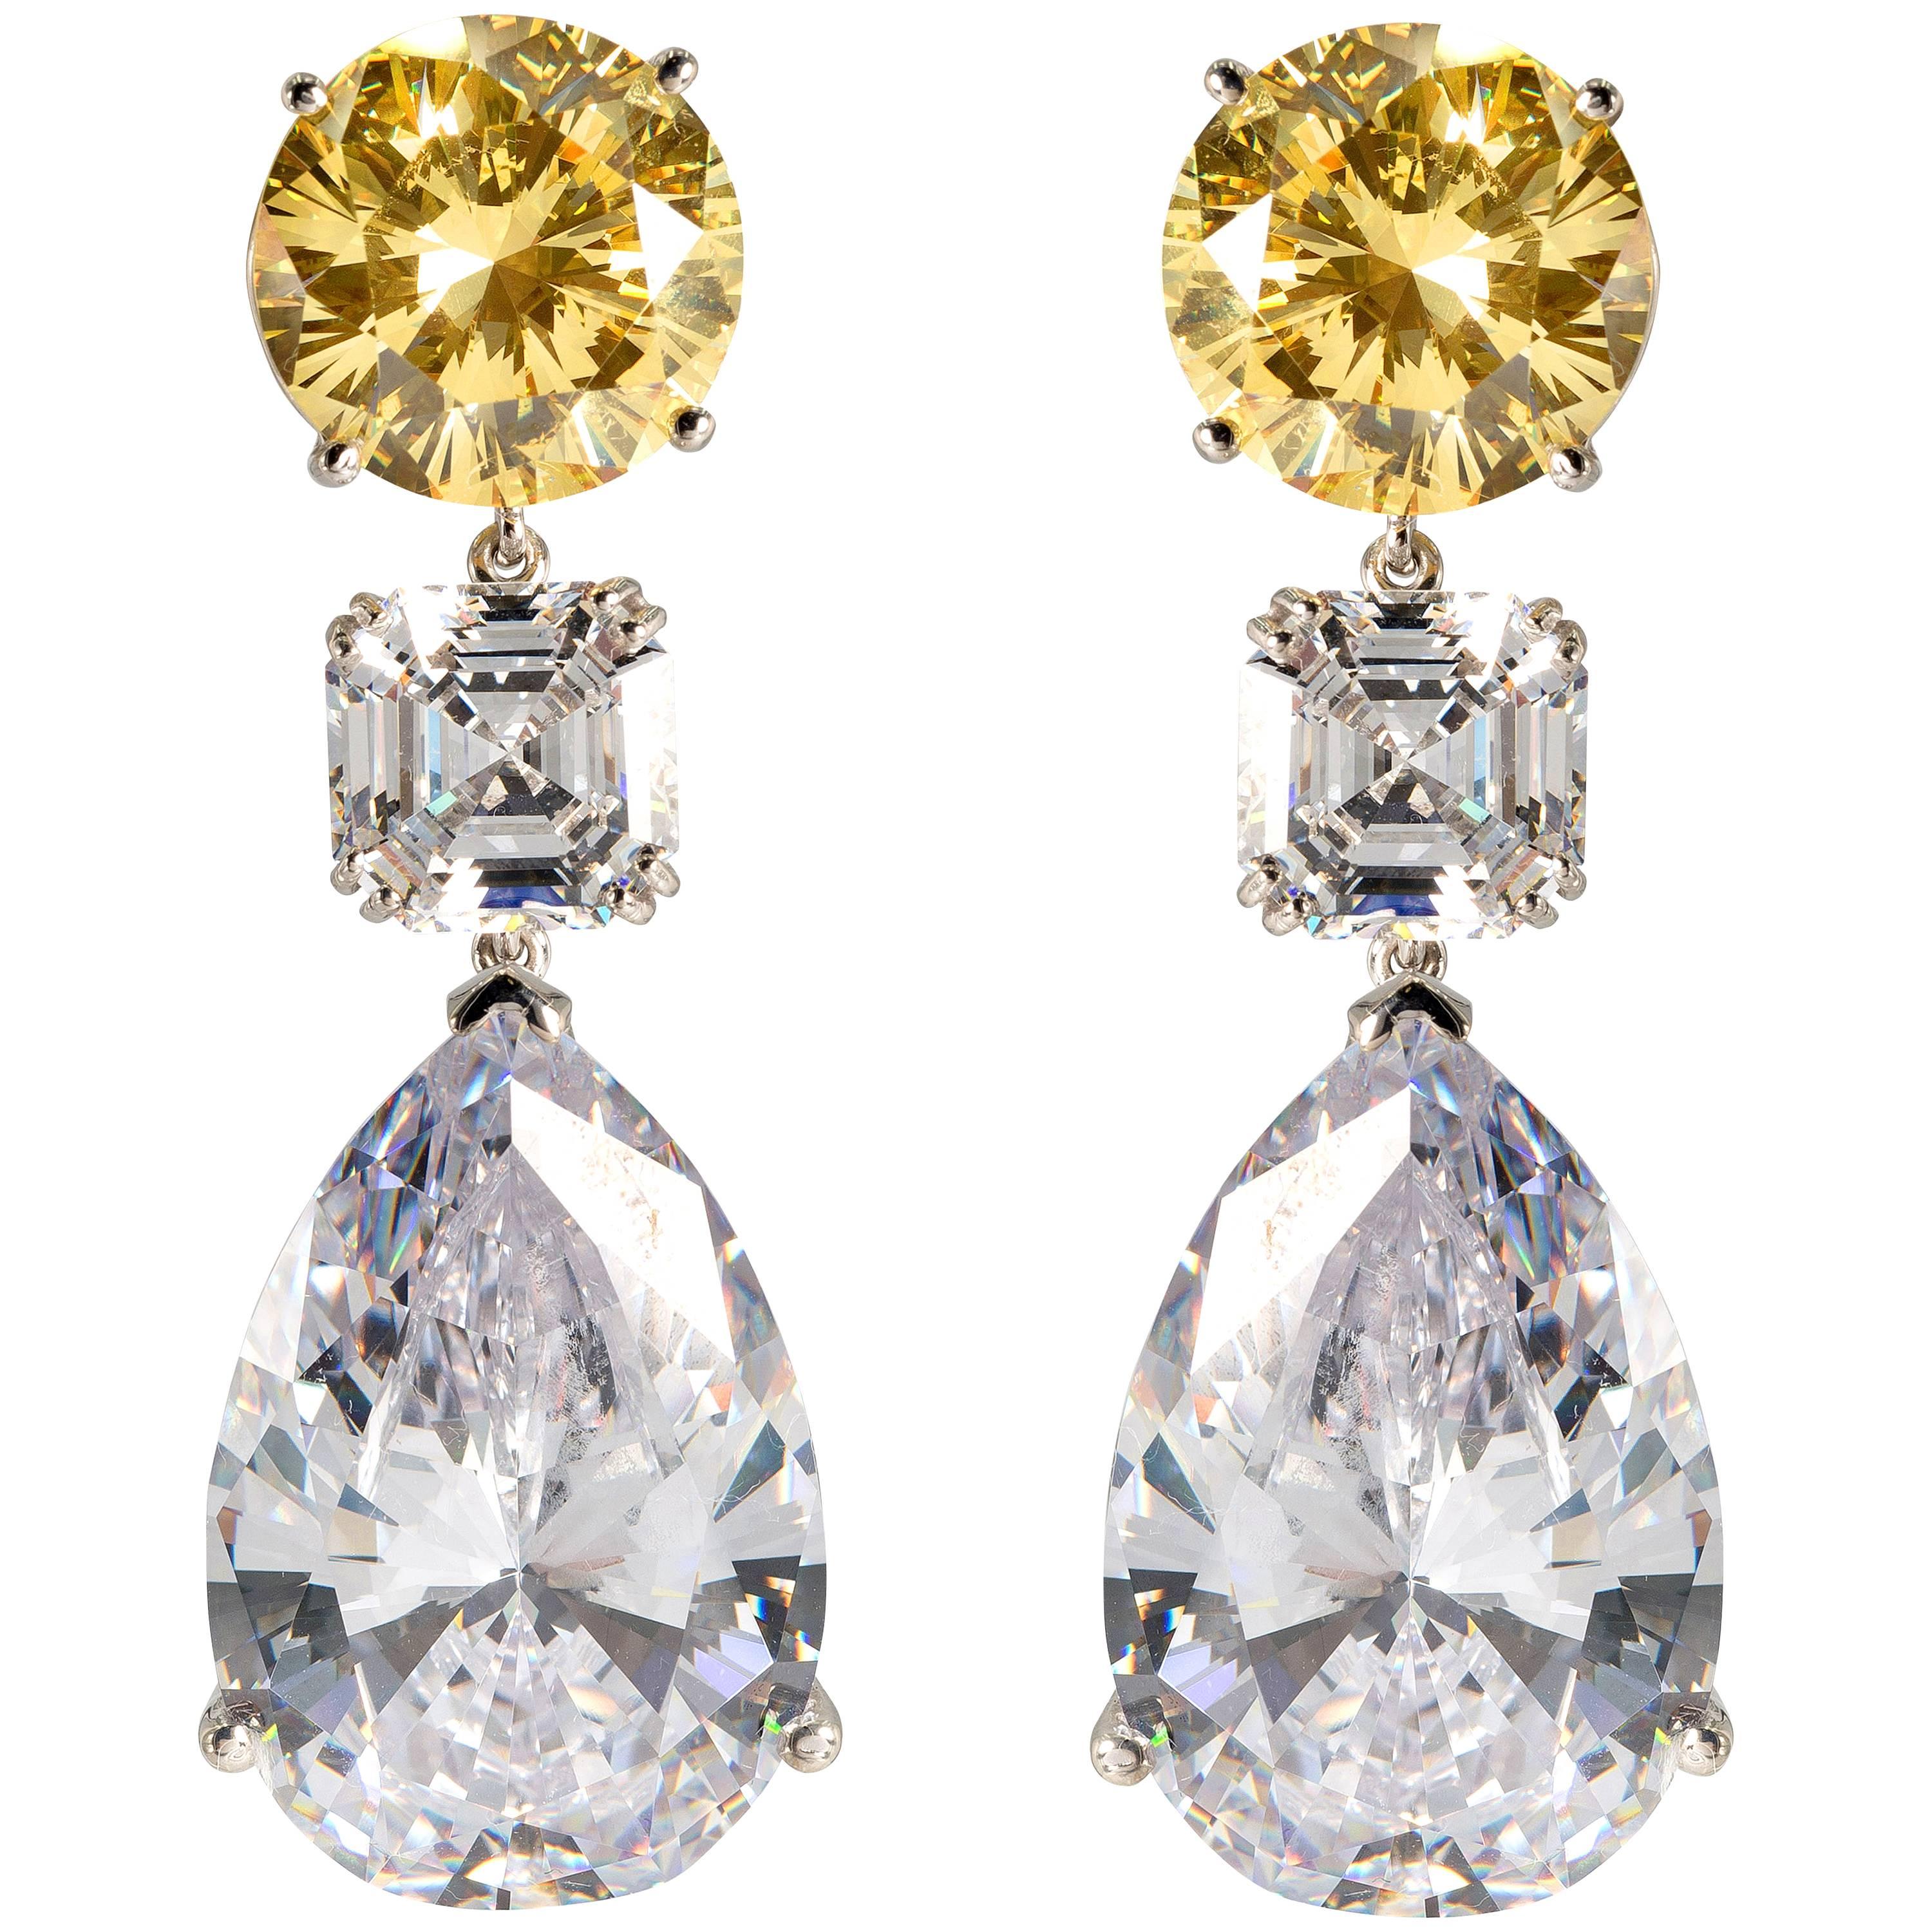 Stunning Large Faux Canary Yellow White Diamond Drop Earrings